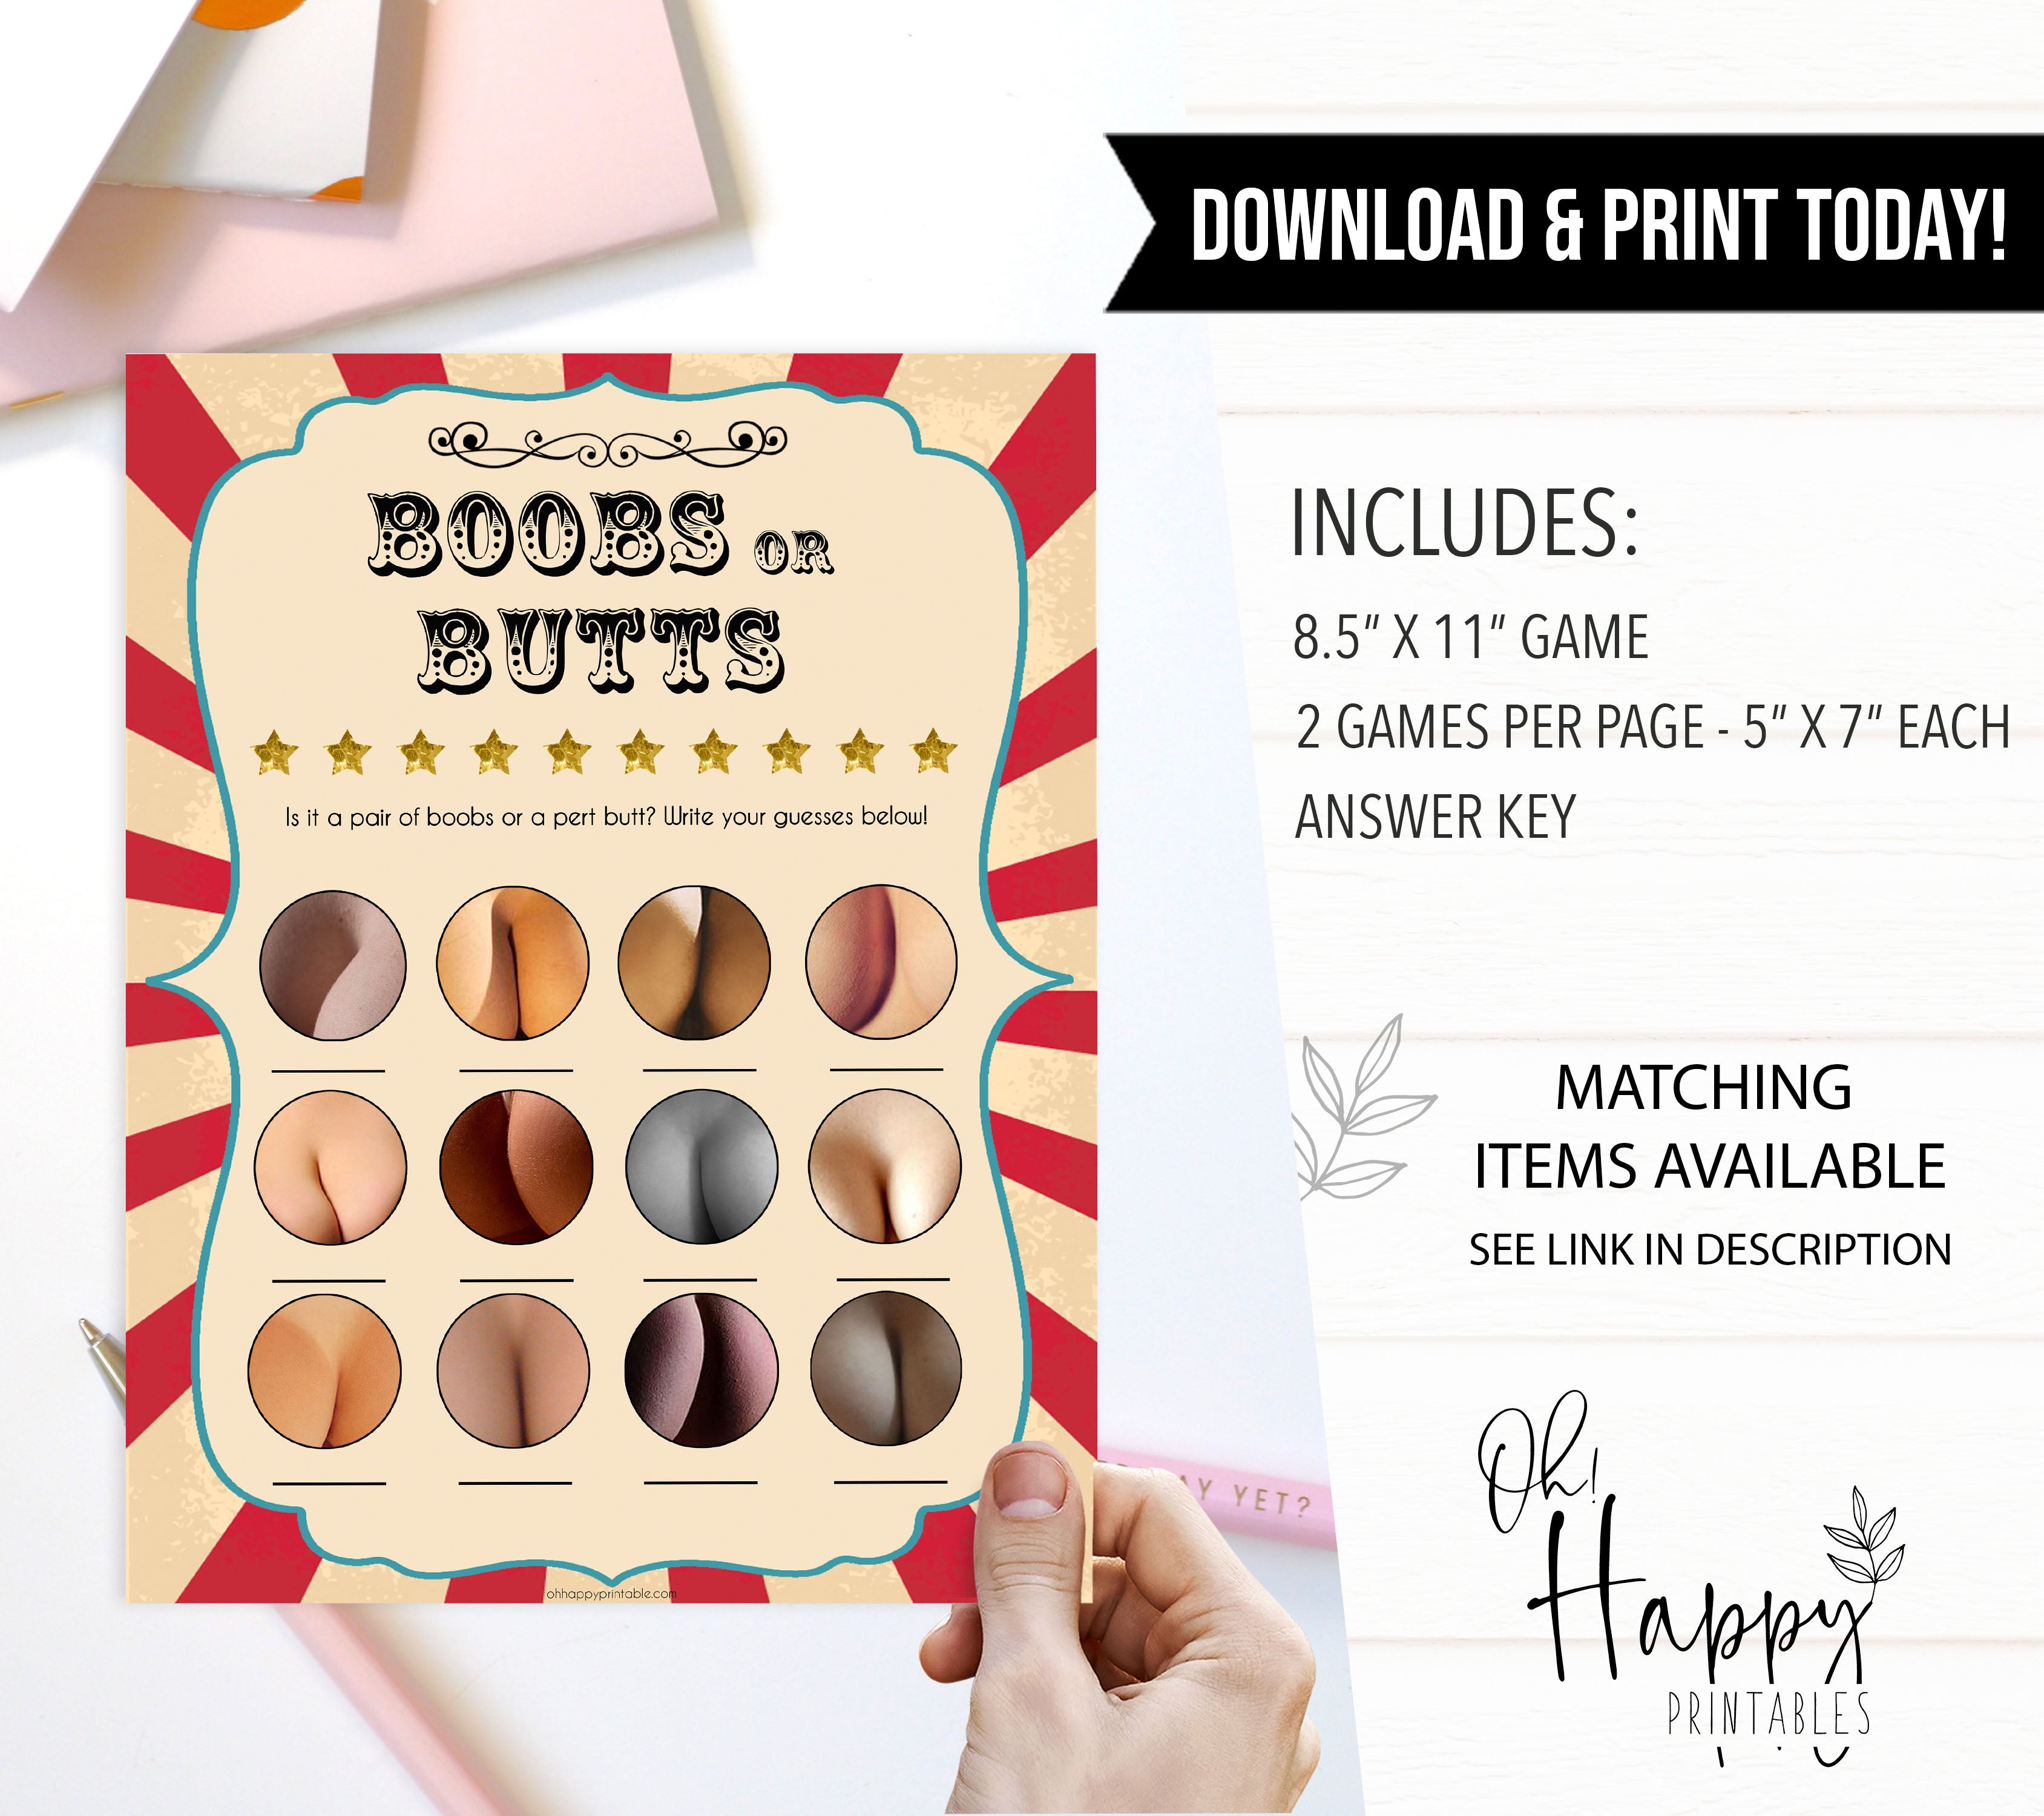 boobs or butts baby game, Printable baby shower games, circus fun baby games, baby shower games, fun baby shower ideas, top baby shower ideas, carnival baby shower, circus baby shower ideas